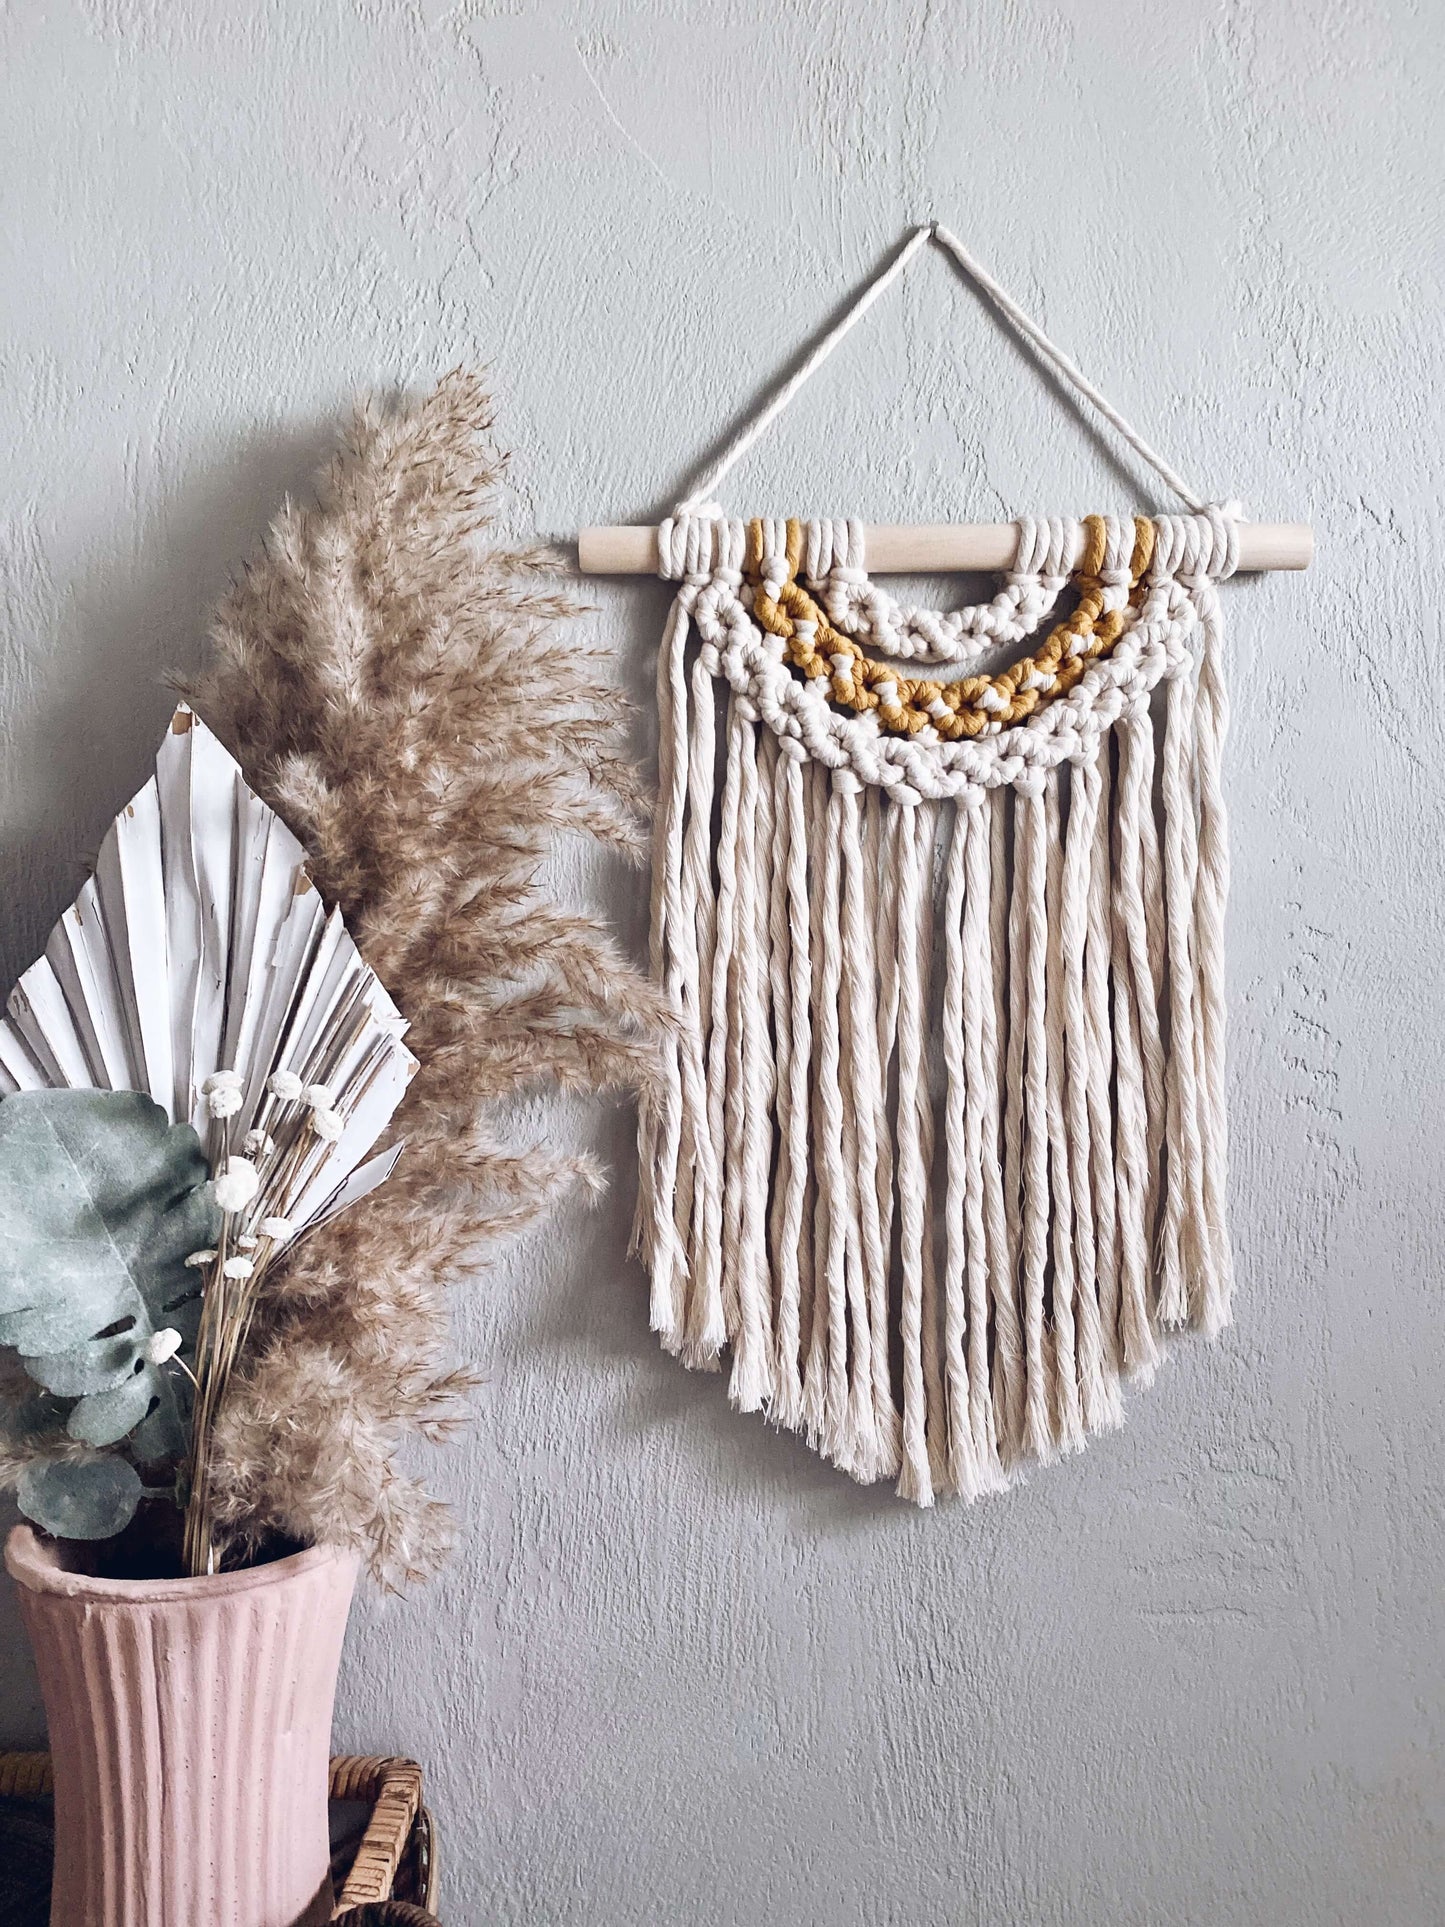 5 Easy Patterns for Macrame Projects  Macrame Patterns for Beginners 